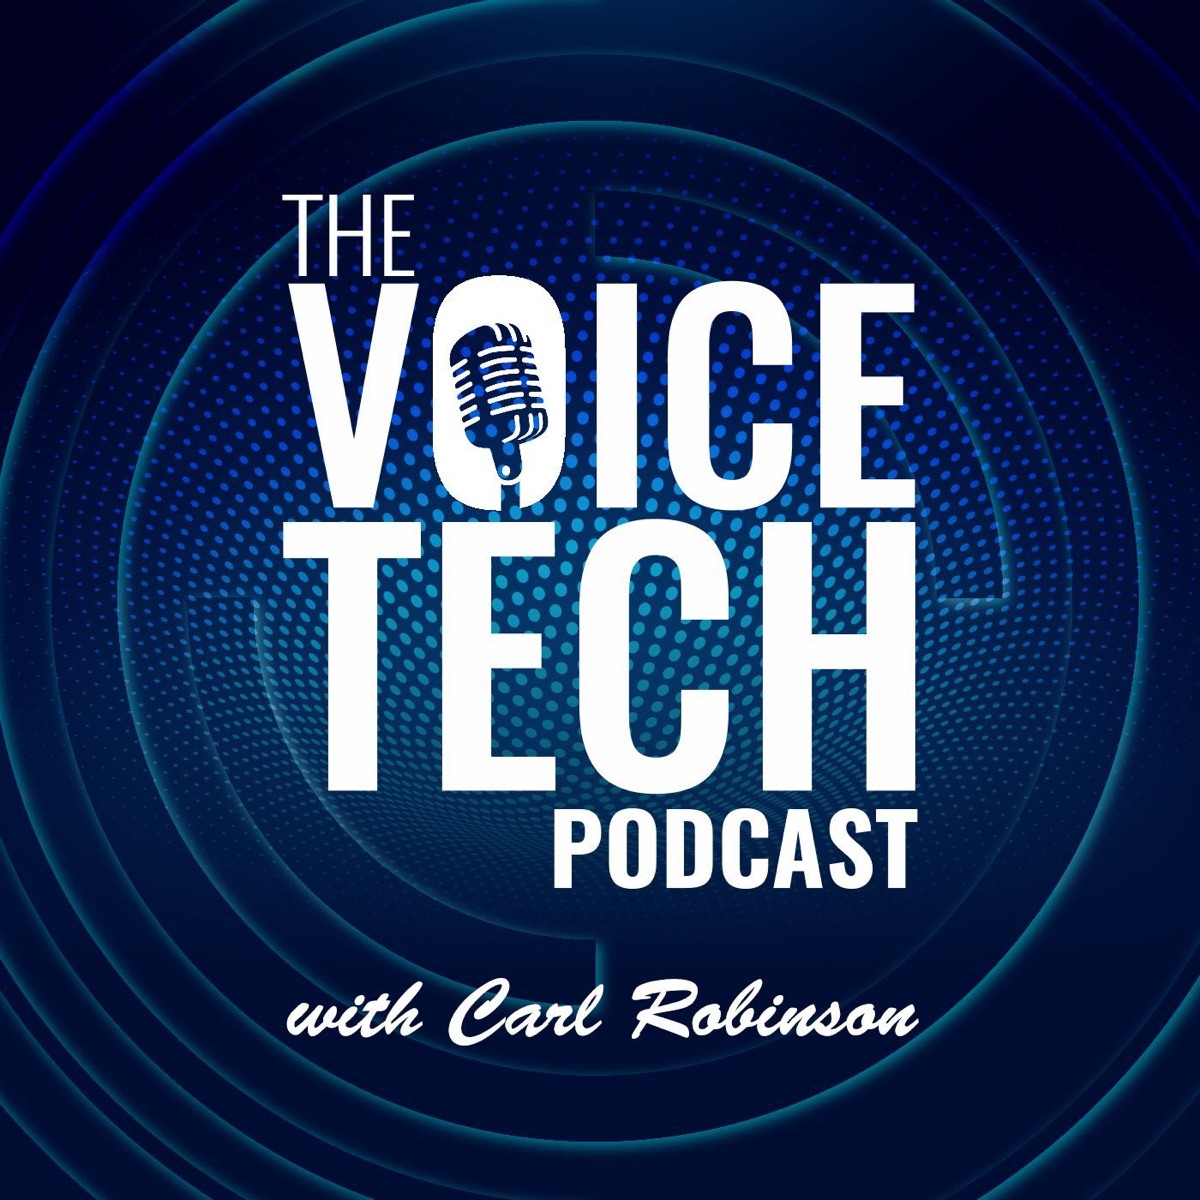 Voice Chat Podcast – Podcast – Podtail